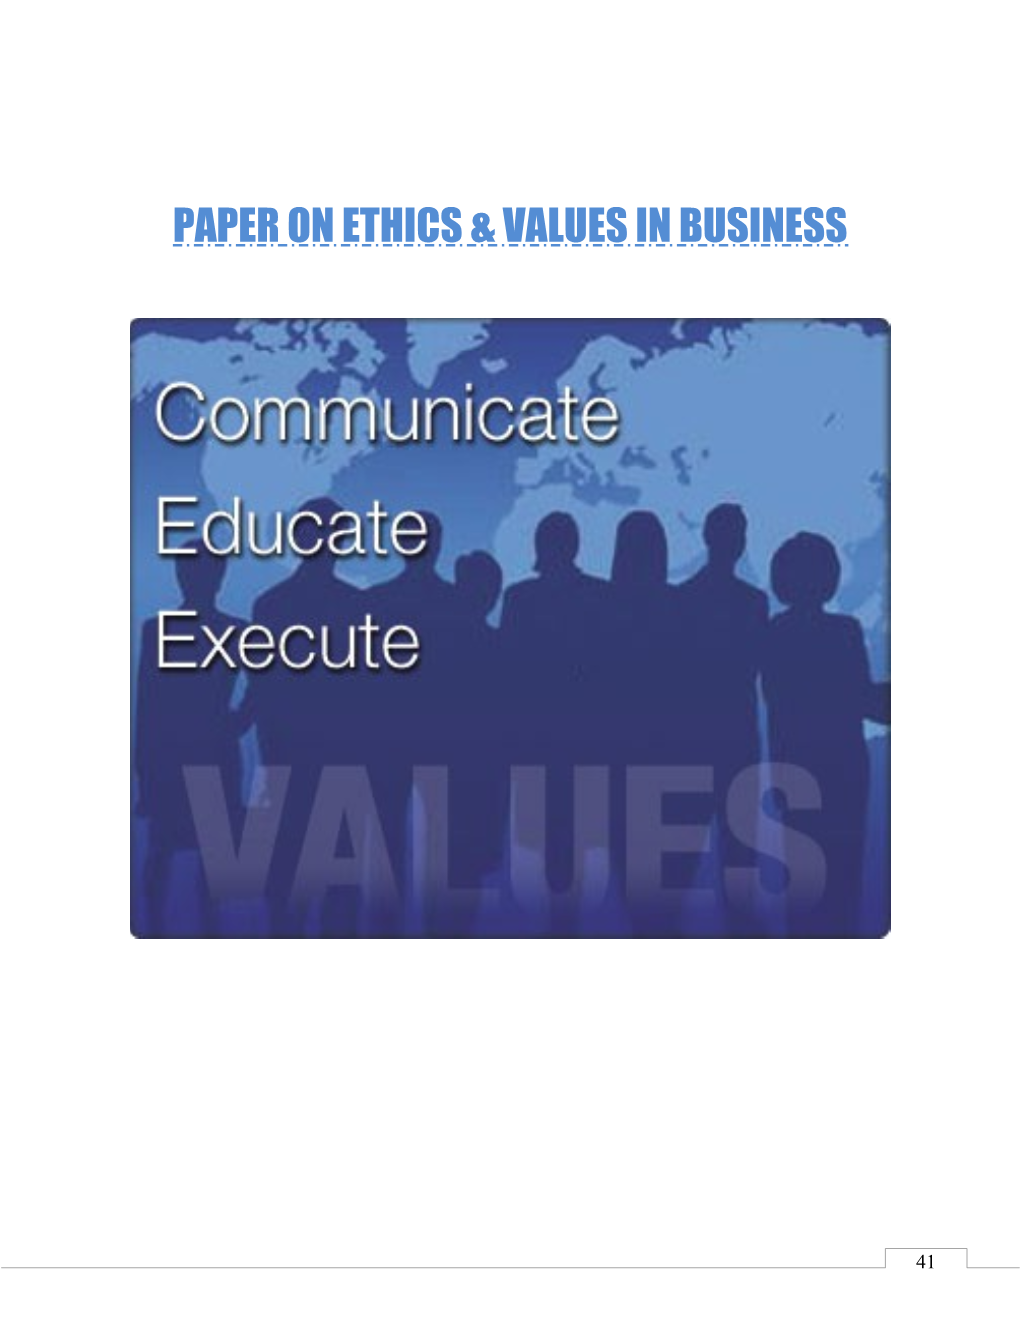 Paper on Ethics & Values in Business